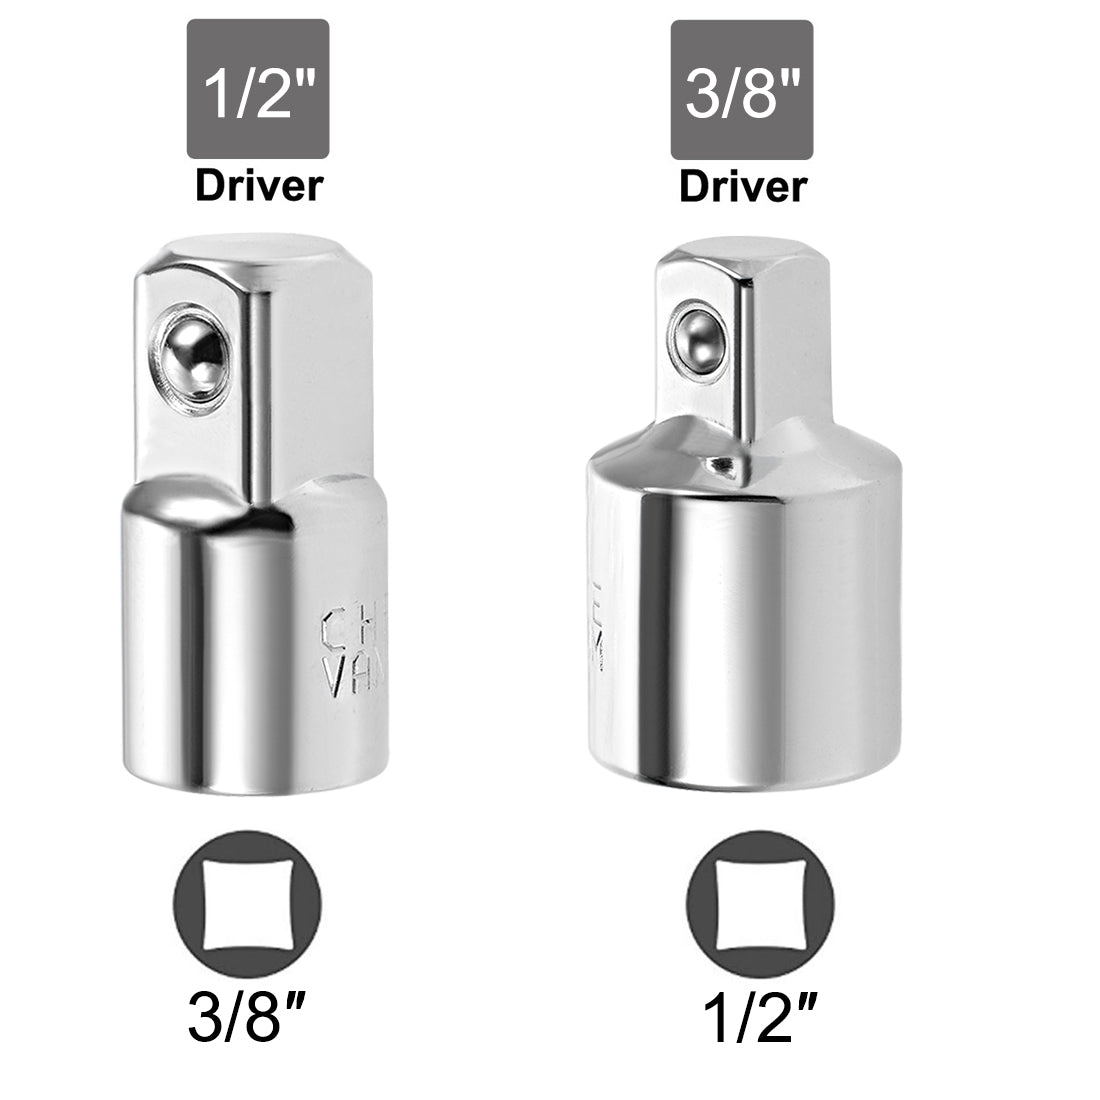 uxcell Uxcell Socket Reducer and Adapter set of 4 Pcs, Female to Male, Cr-V (Silver)